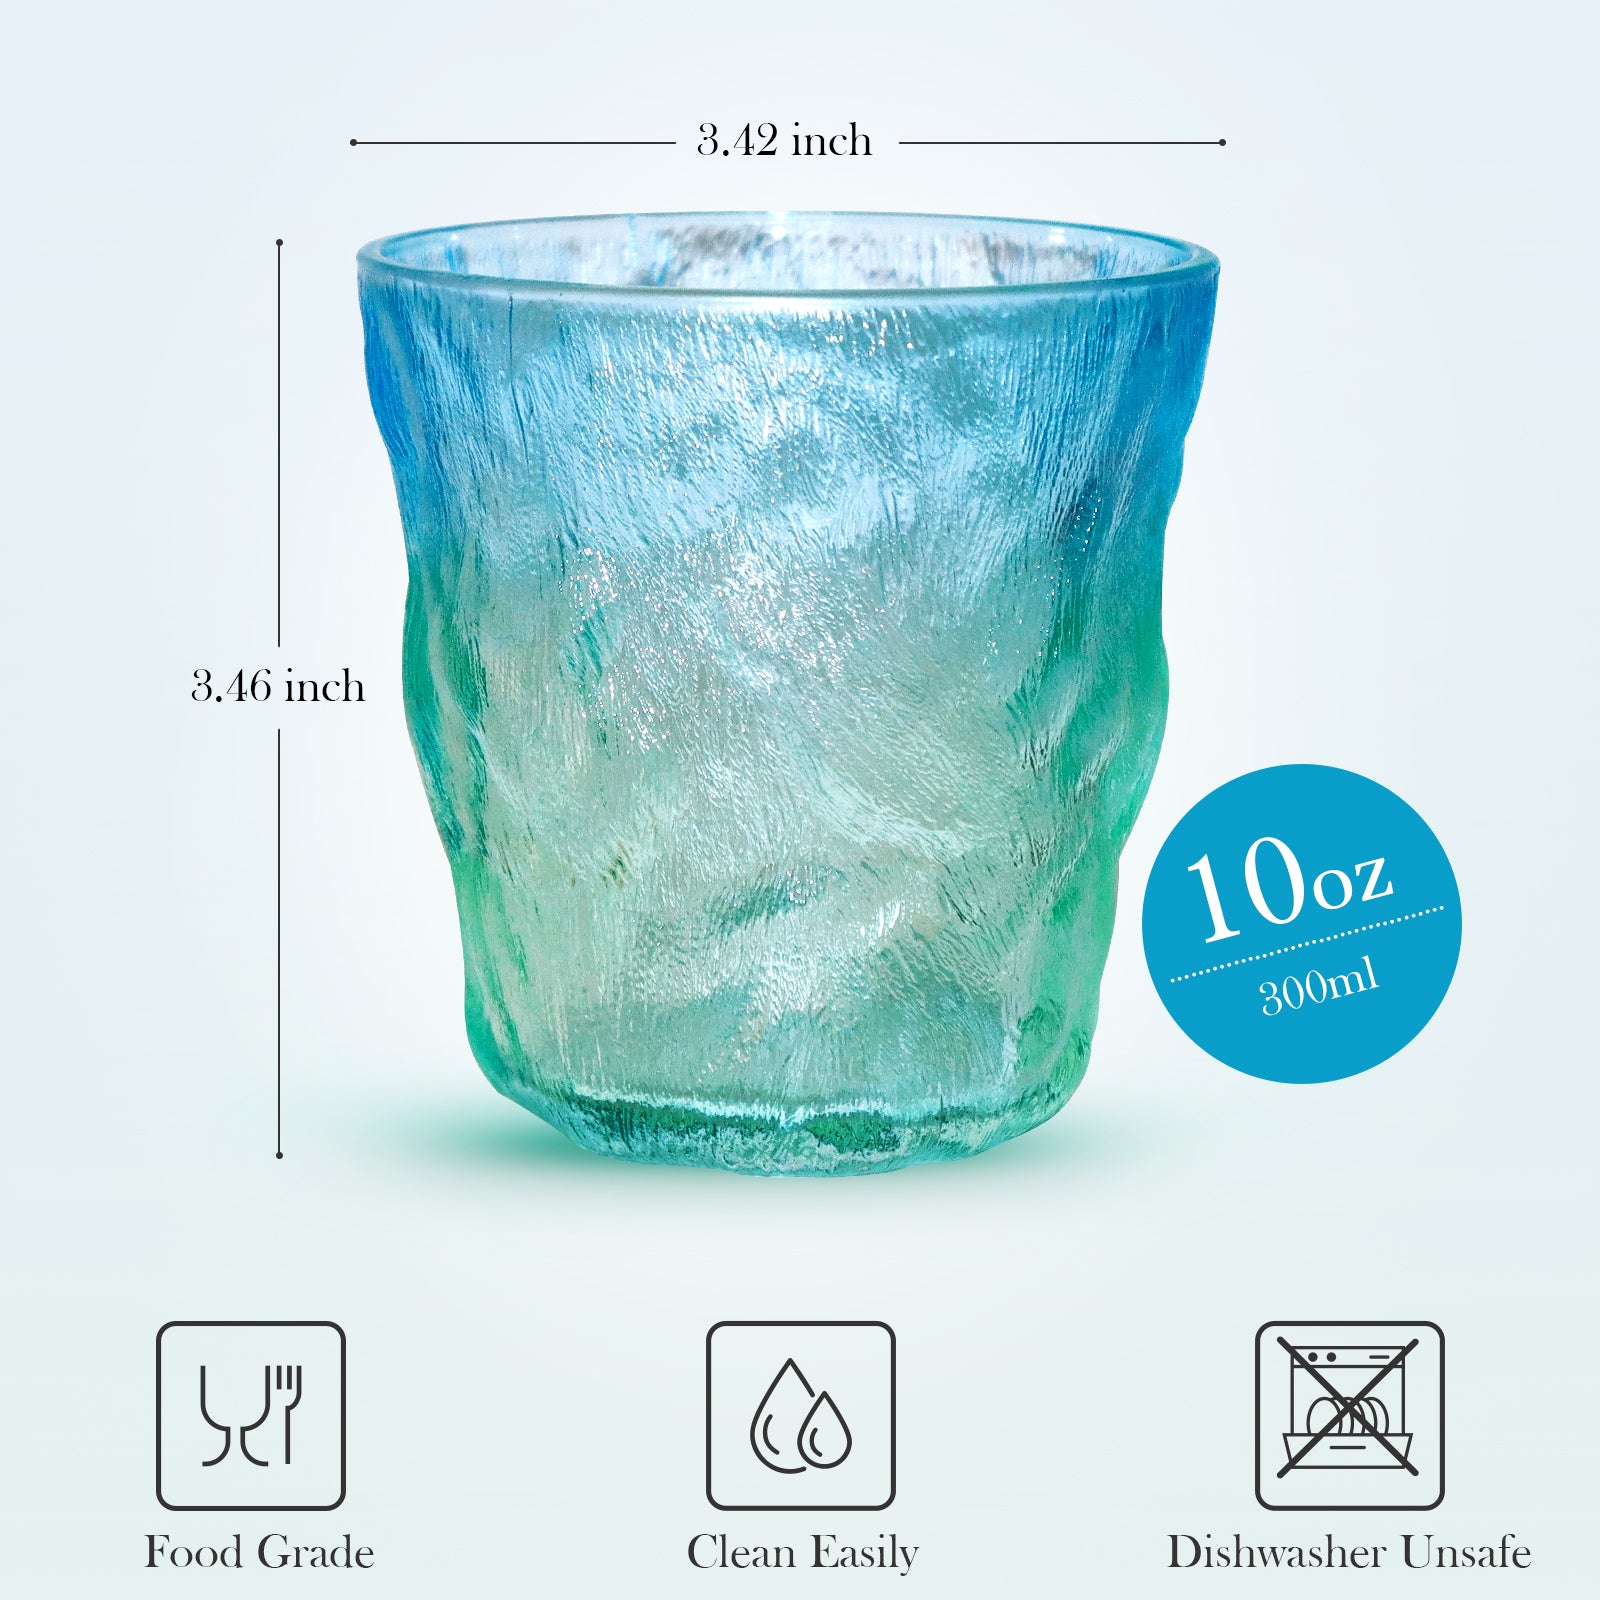 VOBAGA Glacier Drinking Glasses, Iced Coffee Beverage Tea Glass Cups 10oz, Beautiful Gifts